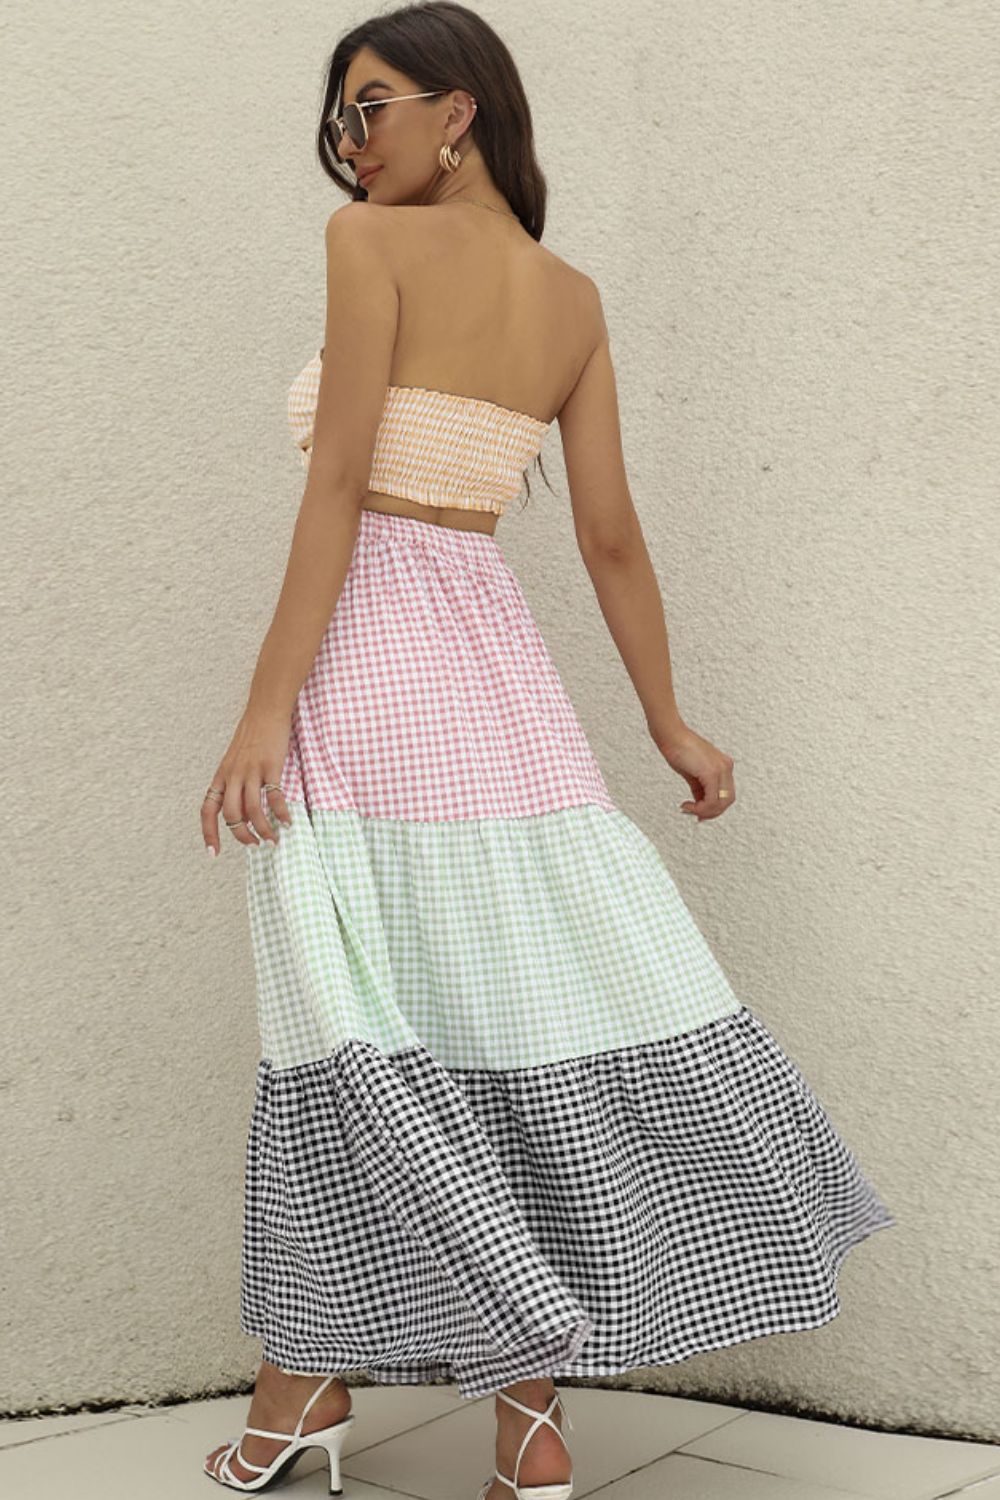 Summer Plaid Top and Tiered Skirt Outfit